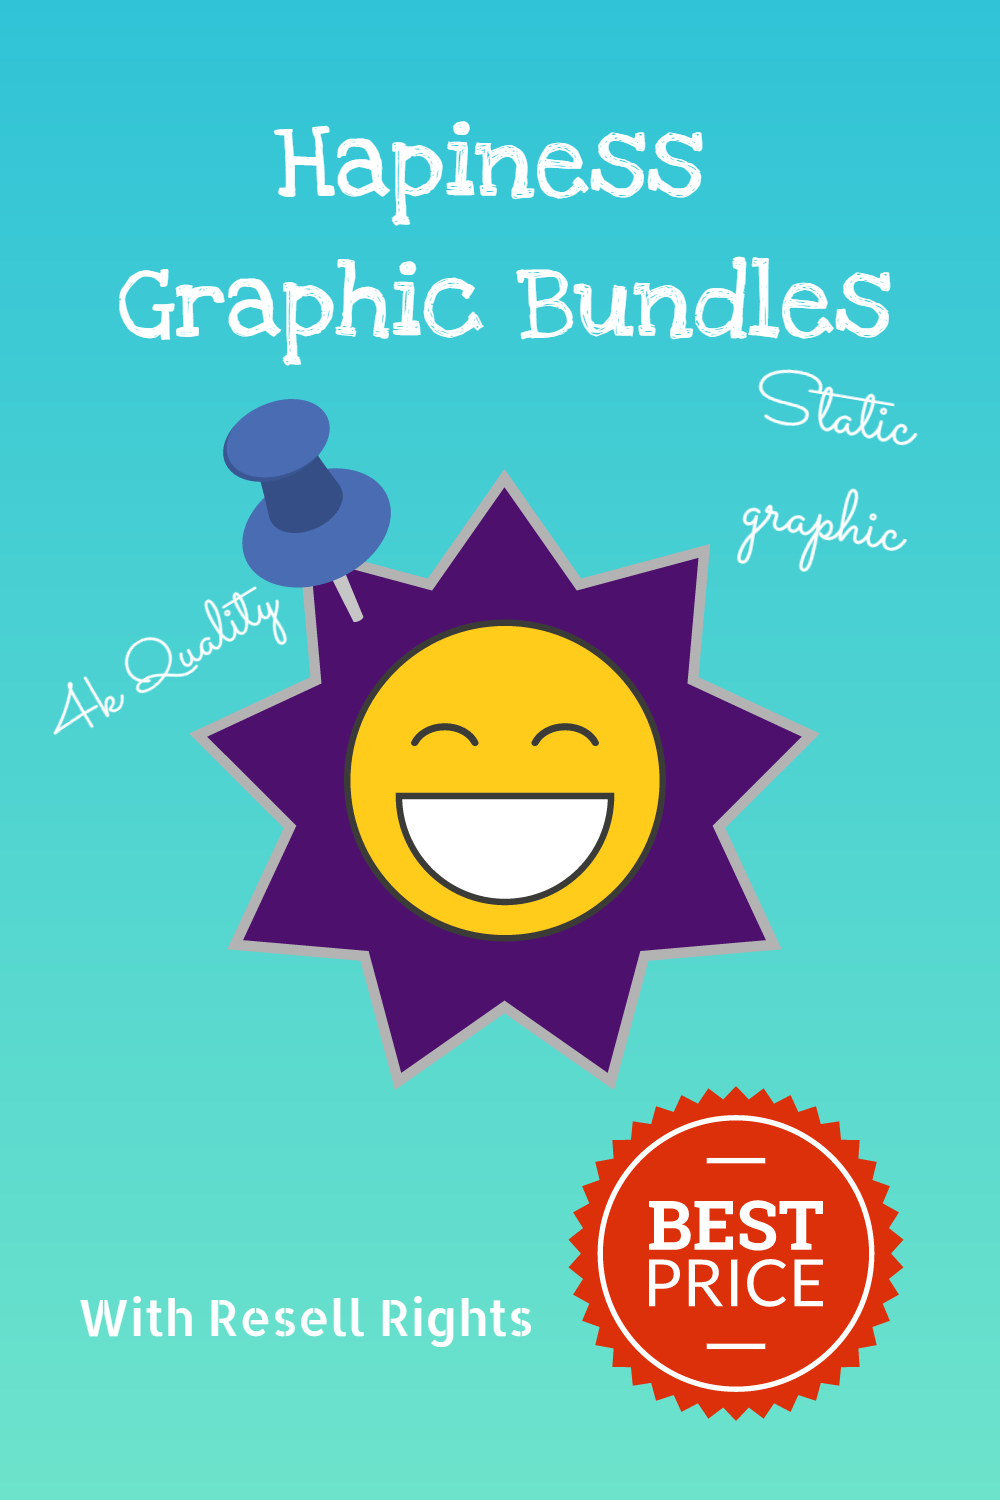 Happiness graphic bundle pinterest preview image.